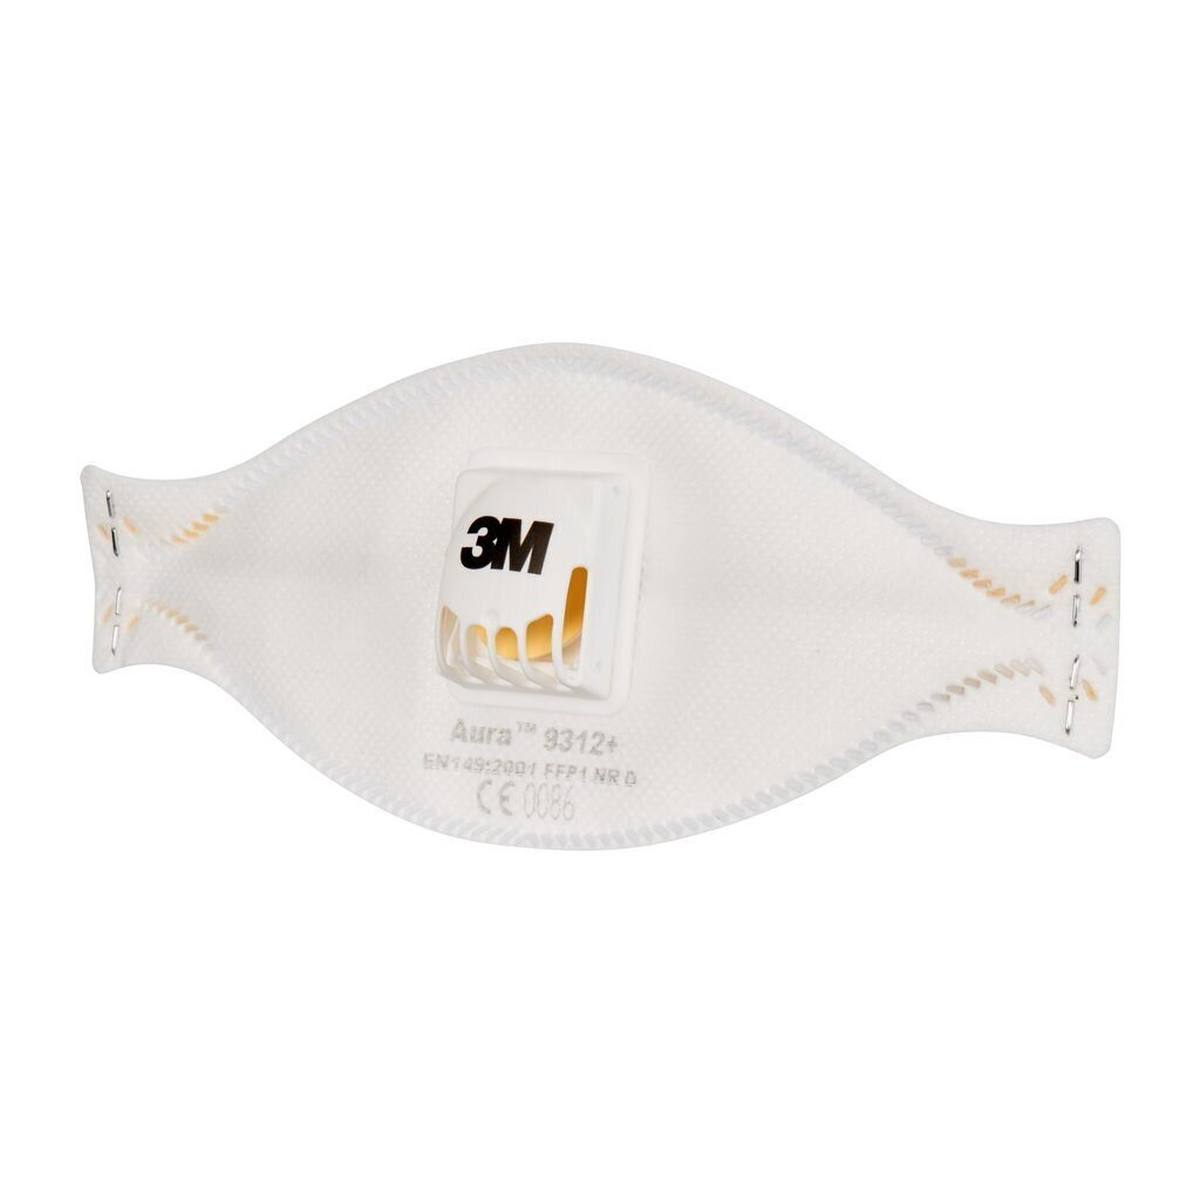 3M 9312 Aura respirator FFP1 with cool-flow exhalation valve, up to 4 times the limit value (hygienically individually packaged)